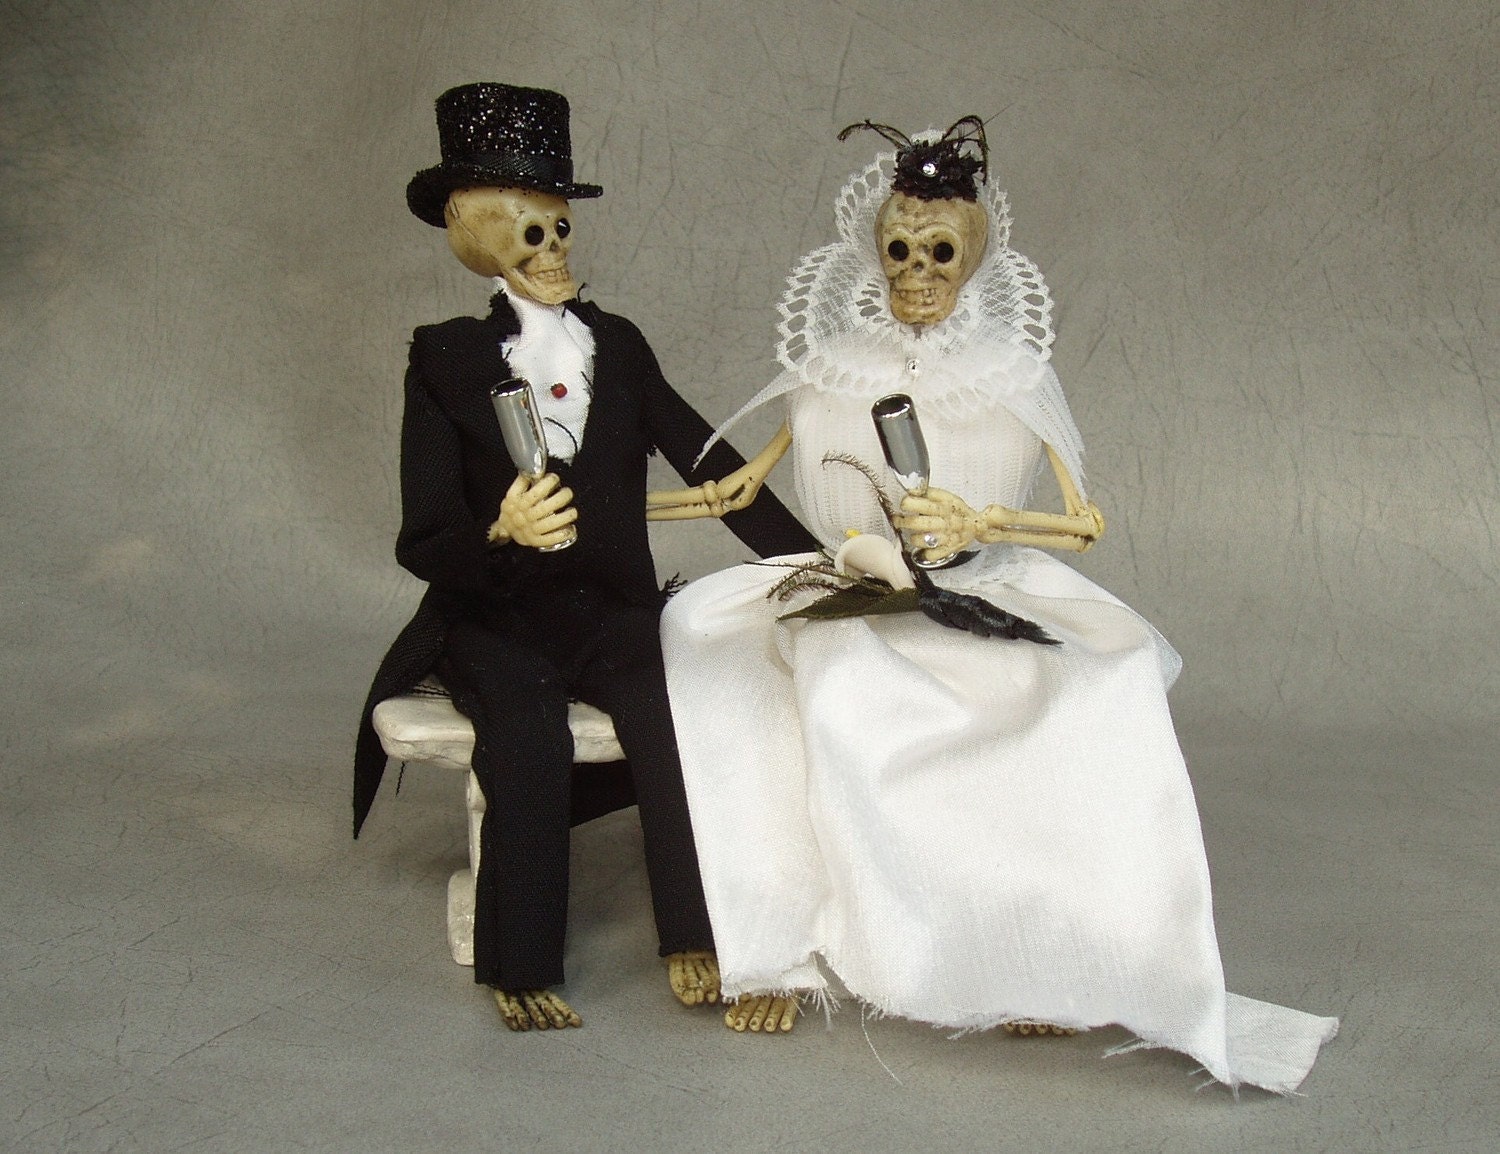  Skeleton  Bride and Groom Wedding  Cake  Topper  by by 